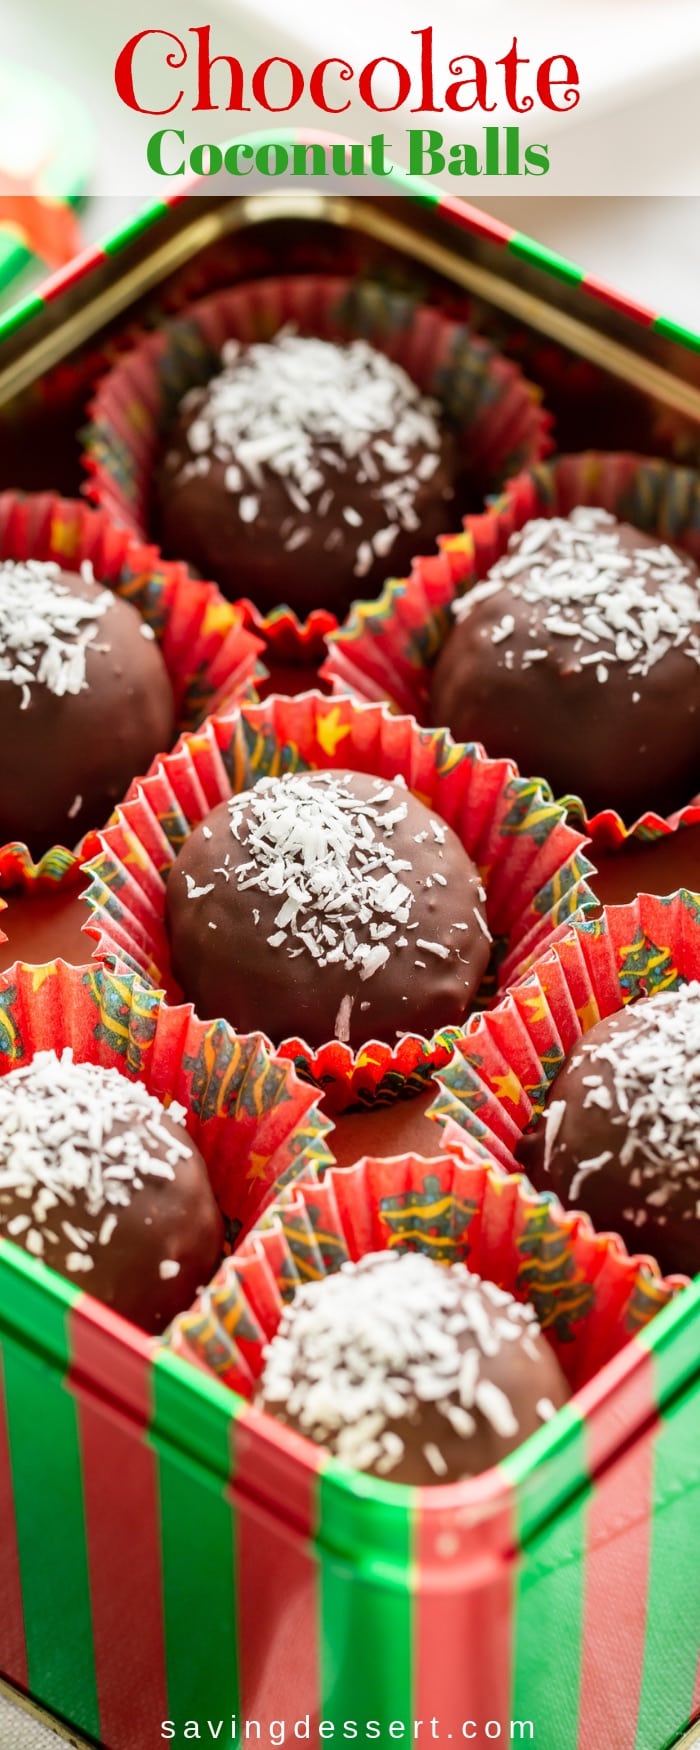 Chocolate Coconut Balls are a decadent blast from the past! Whether you call them bonbons, truffles, coconut candy balls or chocolate coconut balls, these decadent treats are perfect for the coconut lover in your life. #savingroomfordessert #chocolate #coconut #bonbon #truffles #coconutballs #chocolatecoconutballs #Christmastreats #candy